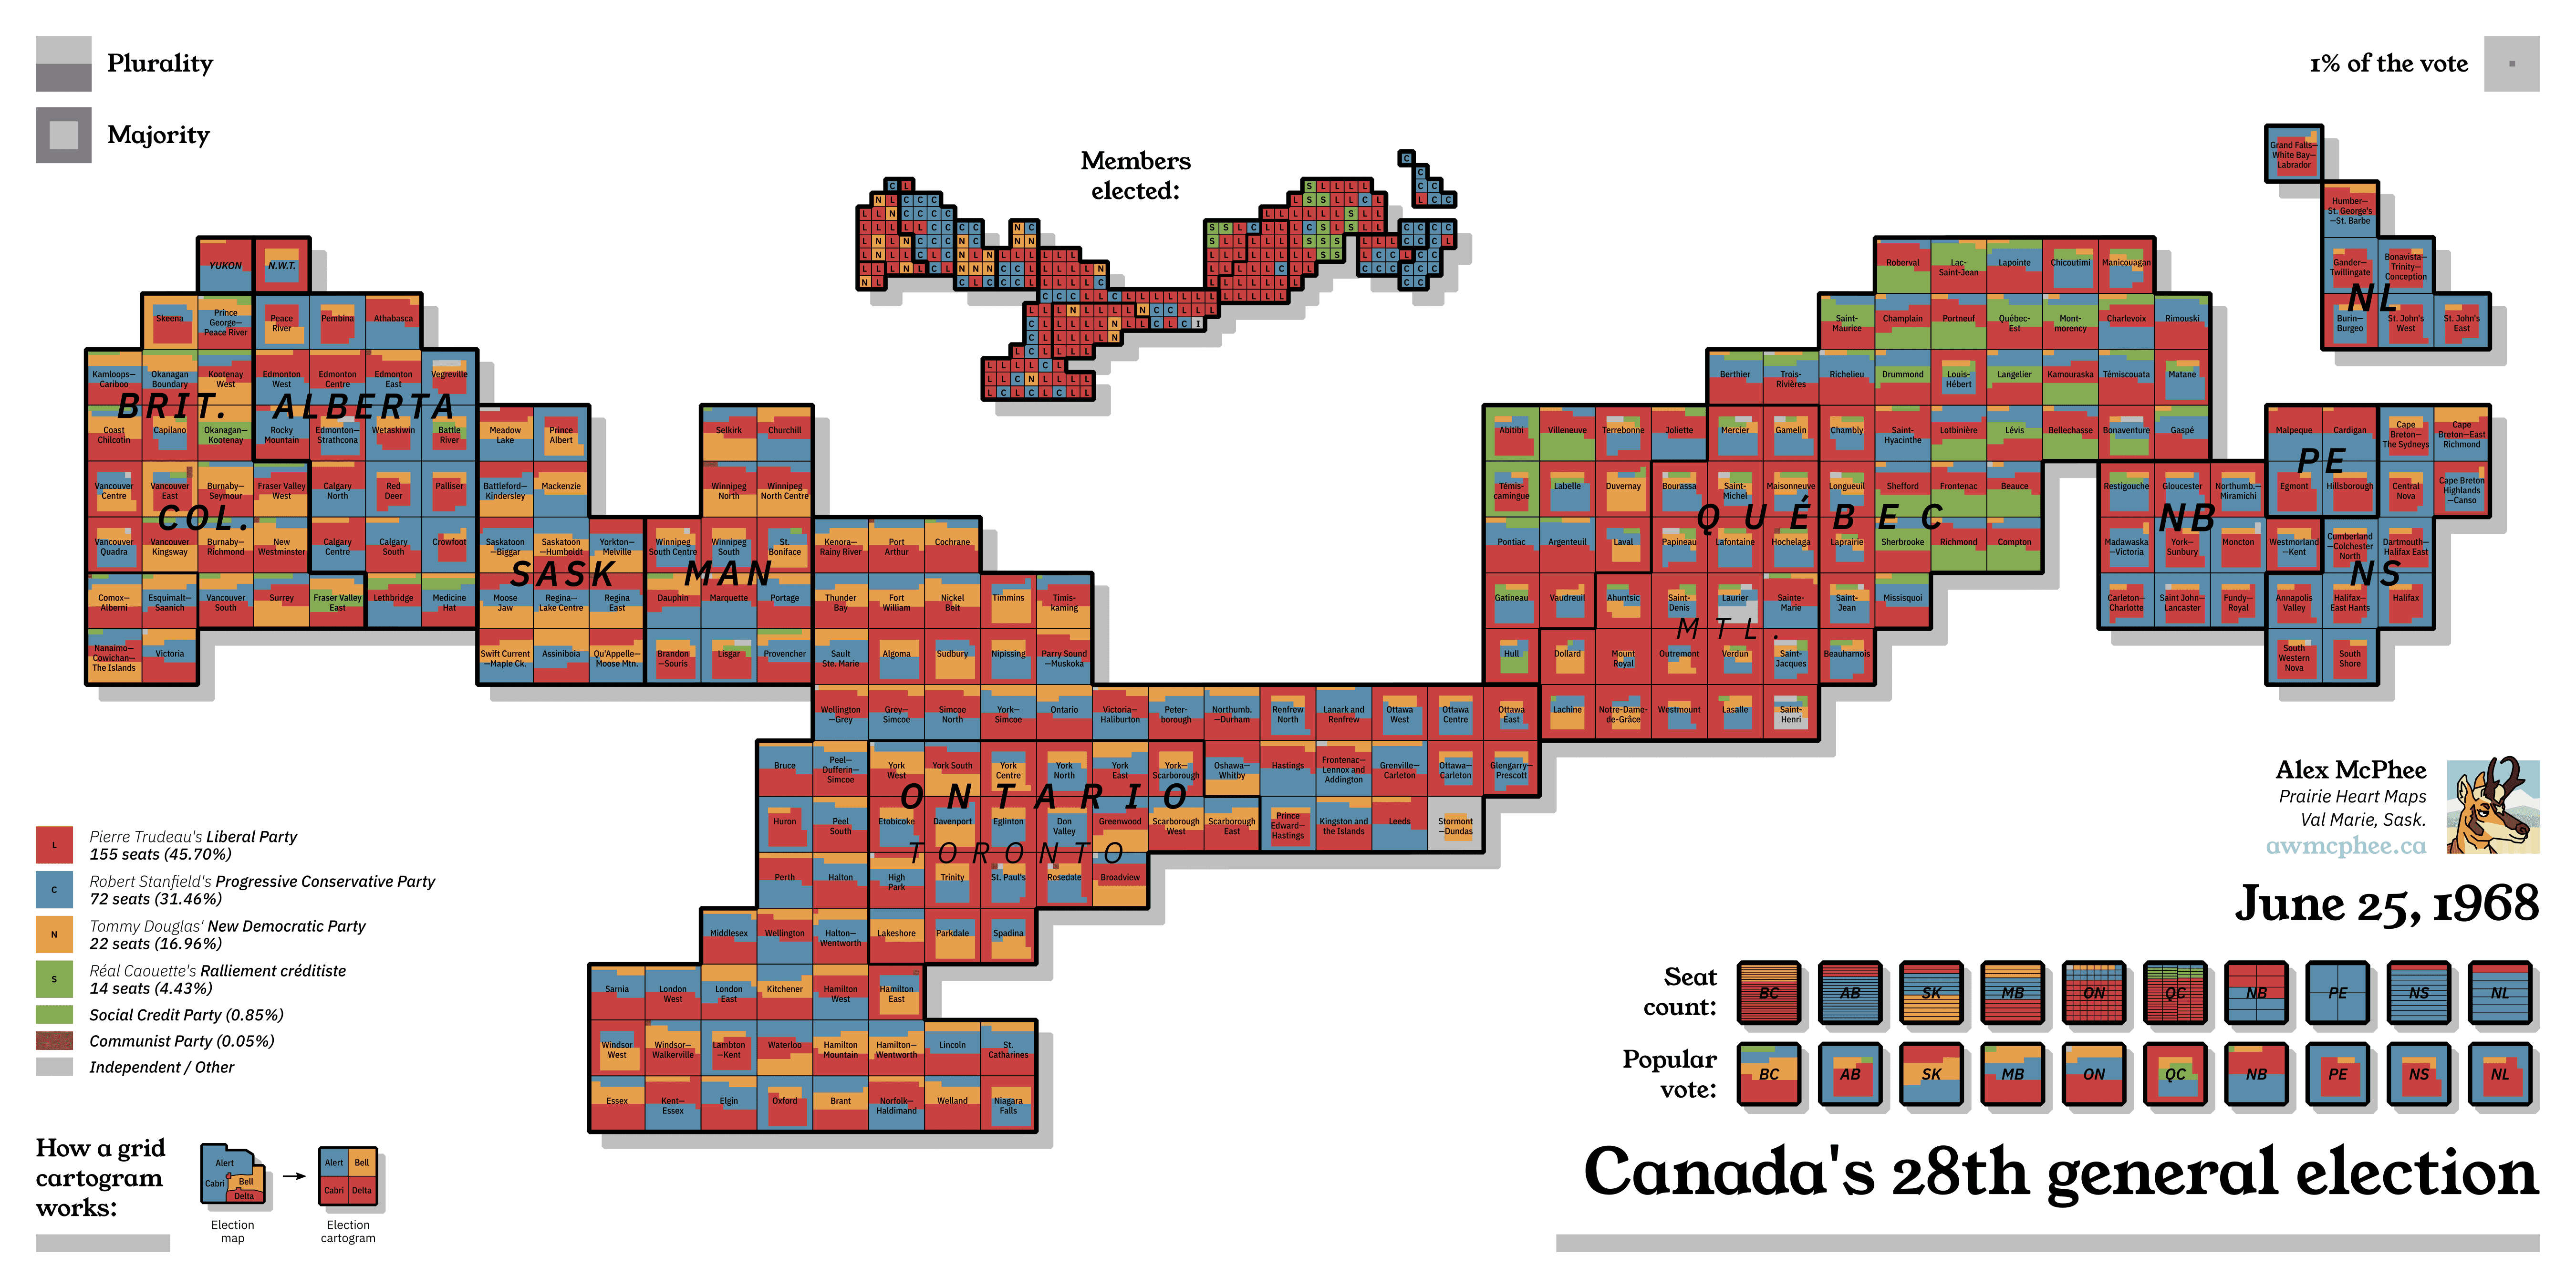 A grid cartogram depicting the results of Canada's 1968 federal election.